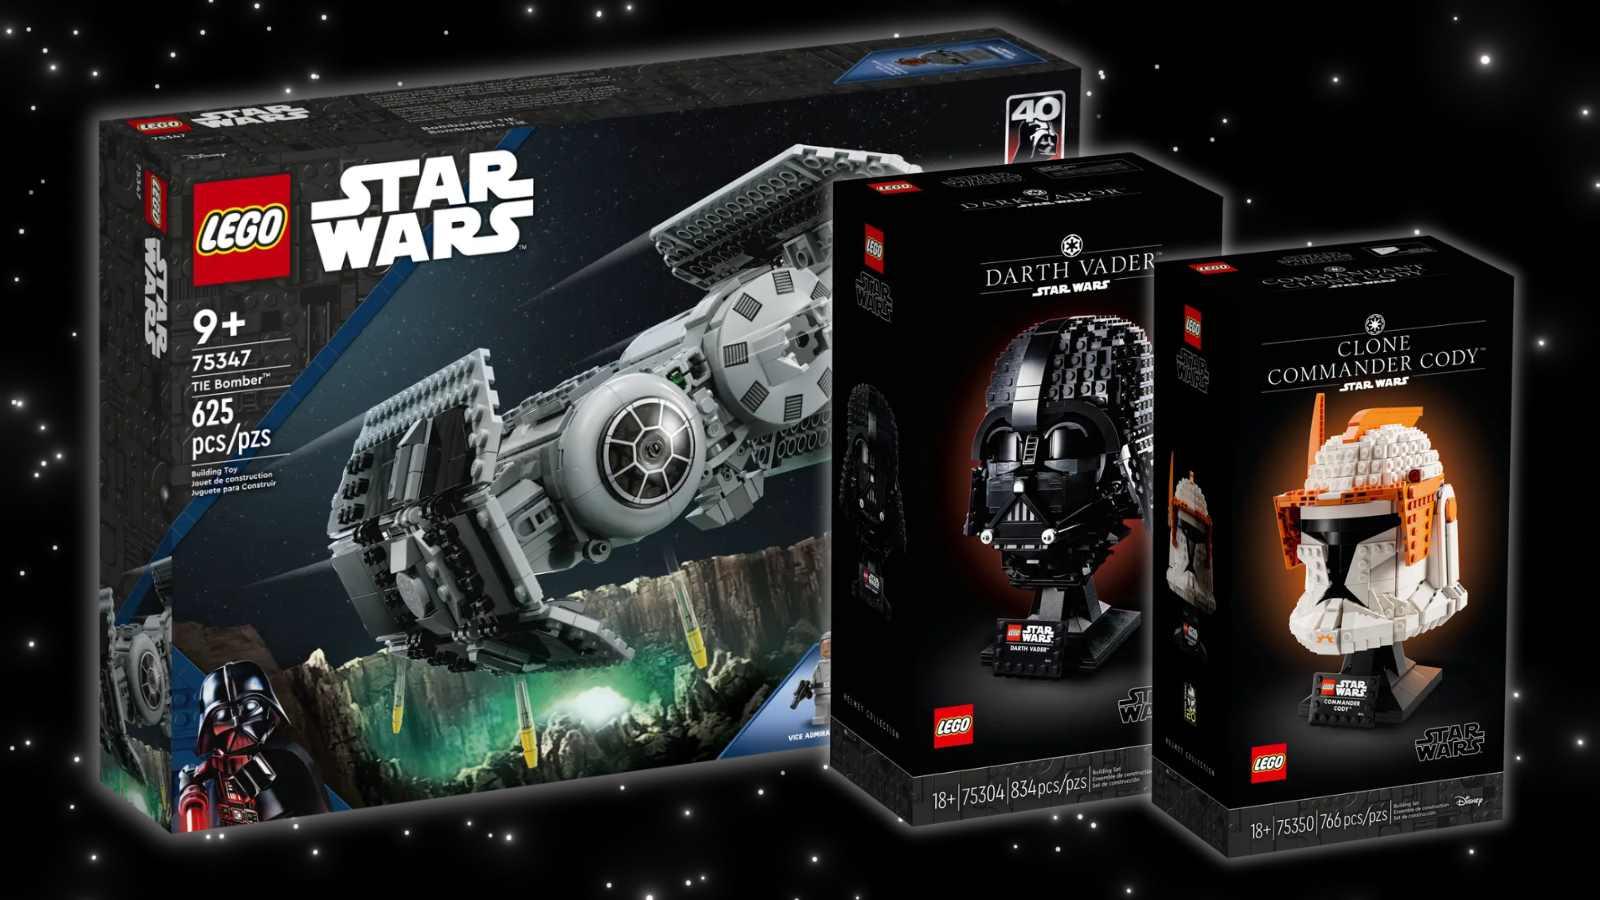 Three of the LEGO Star Wars sets discounted at Best Buy on a galaxy background